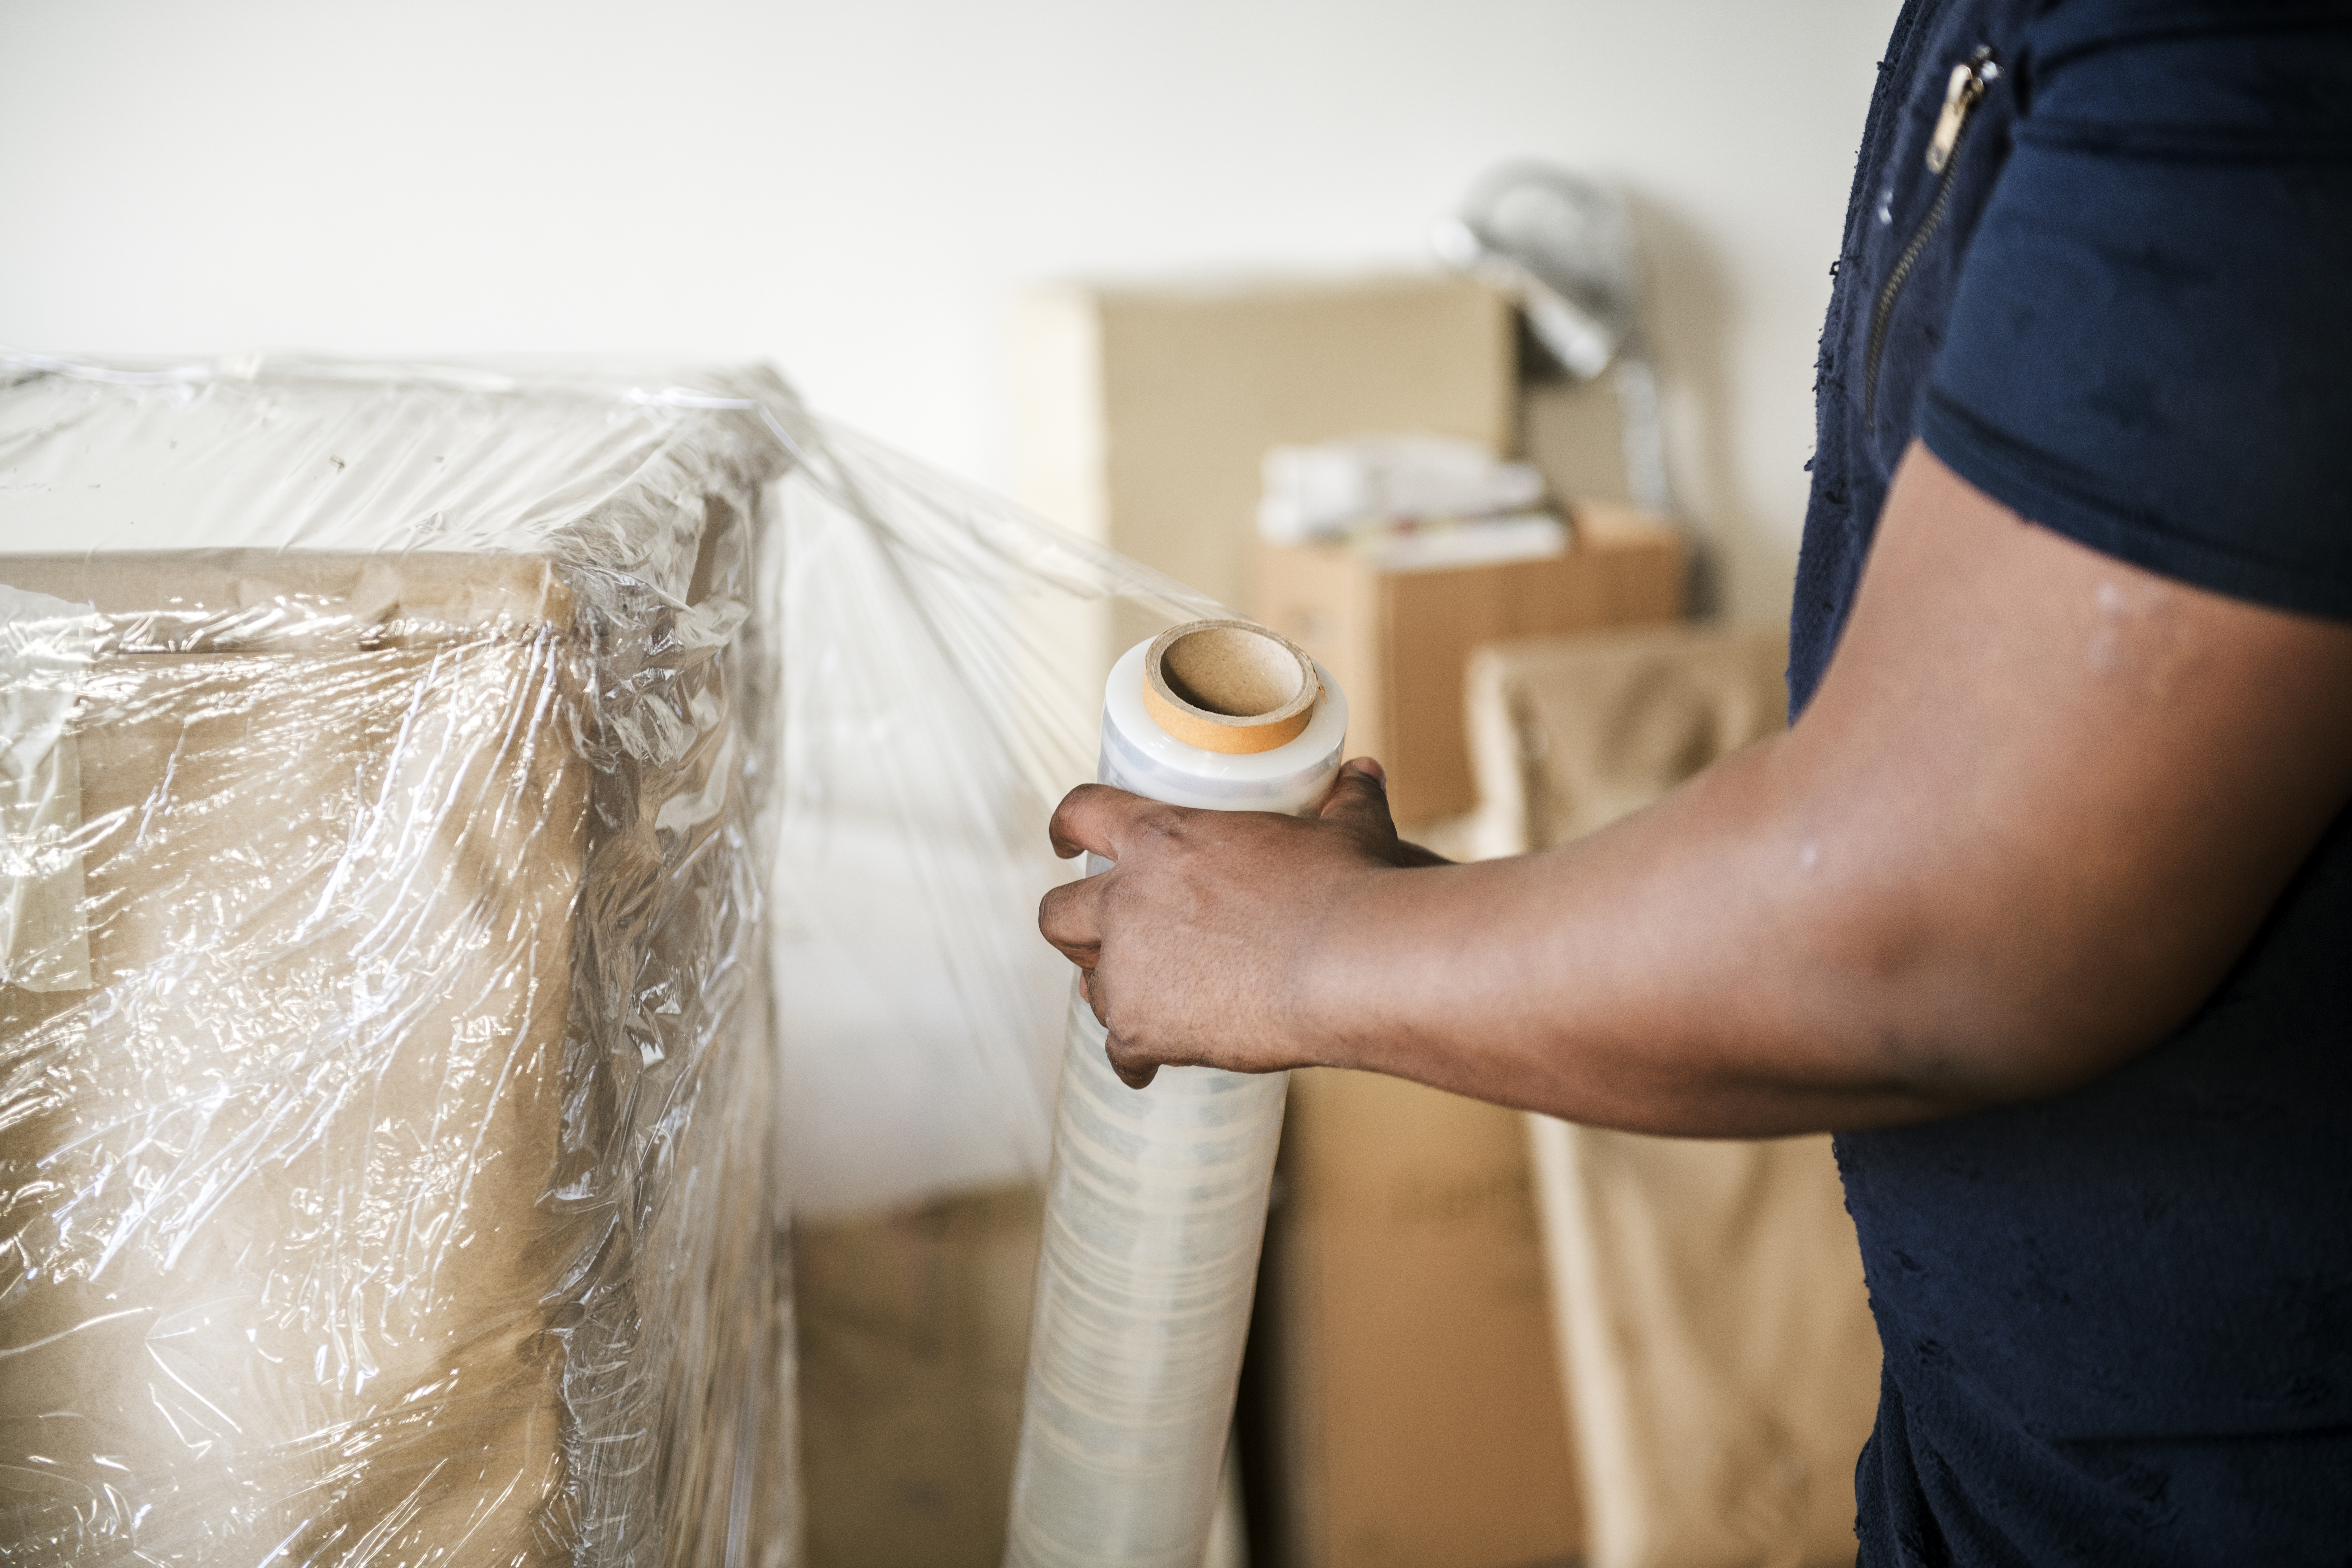 packers and movers moving furniture